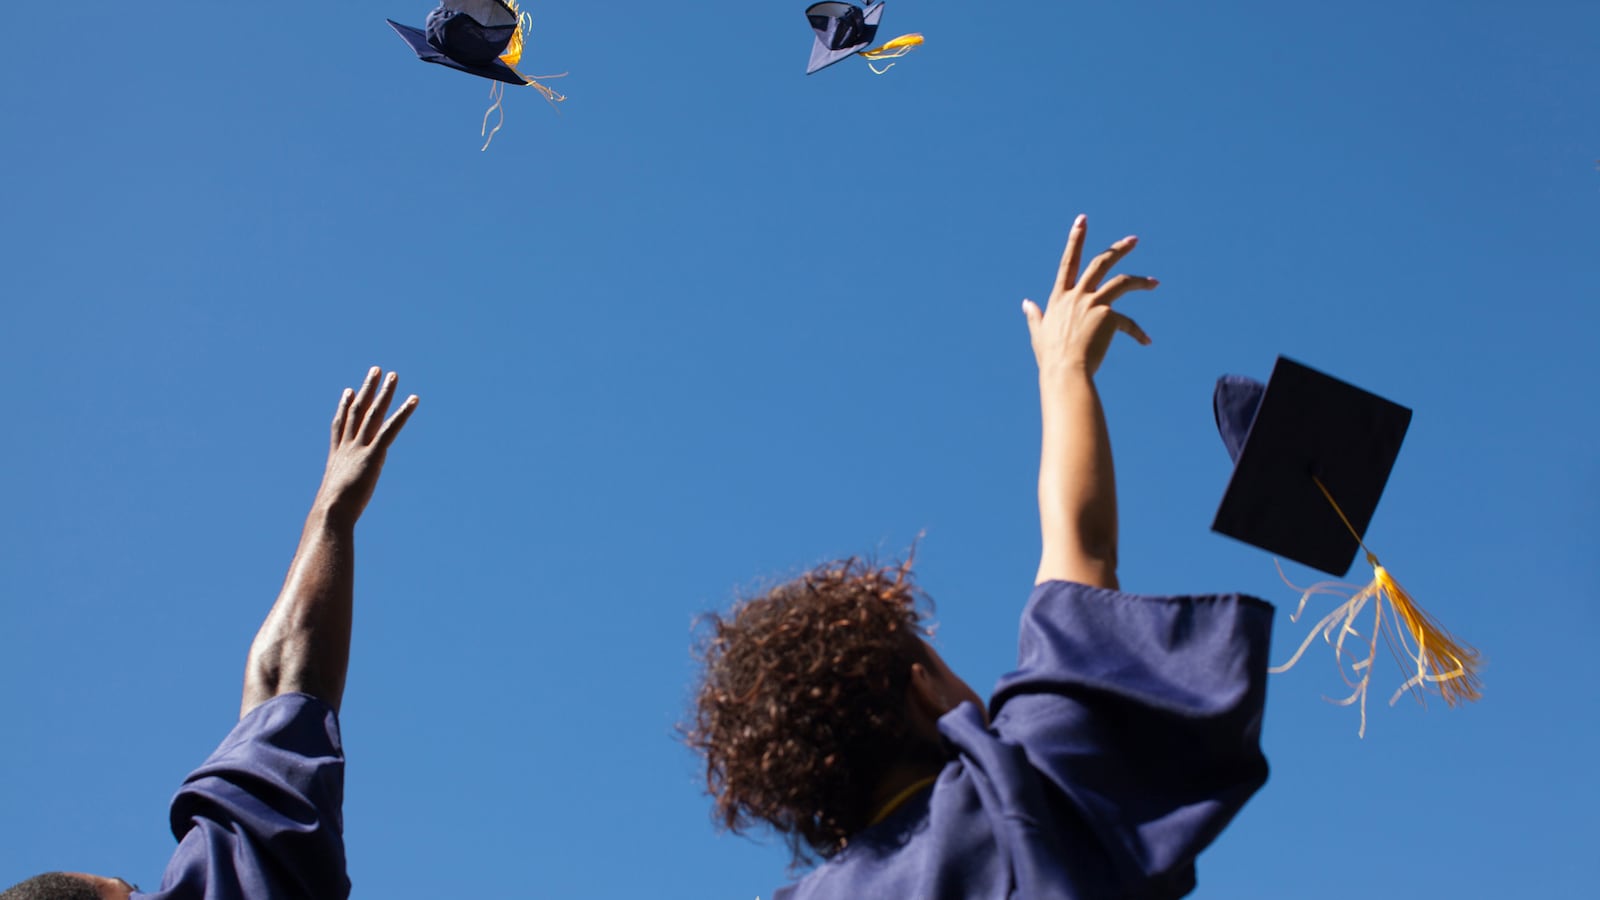 Two high school graduates wearing blue gowns throw their caps into the air.